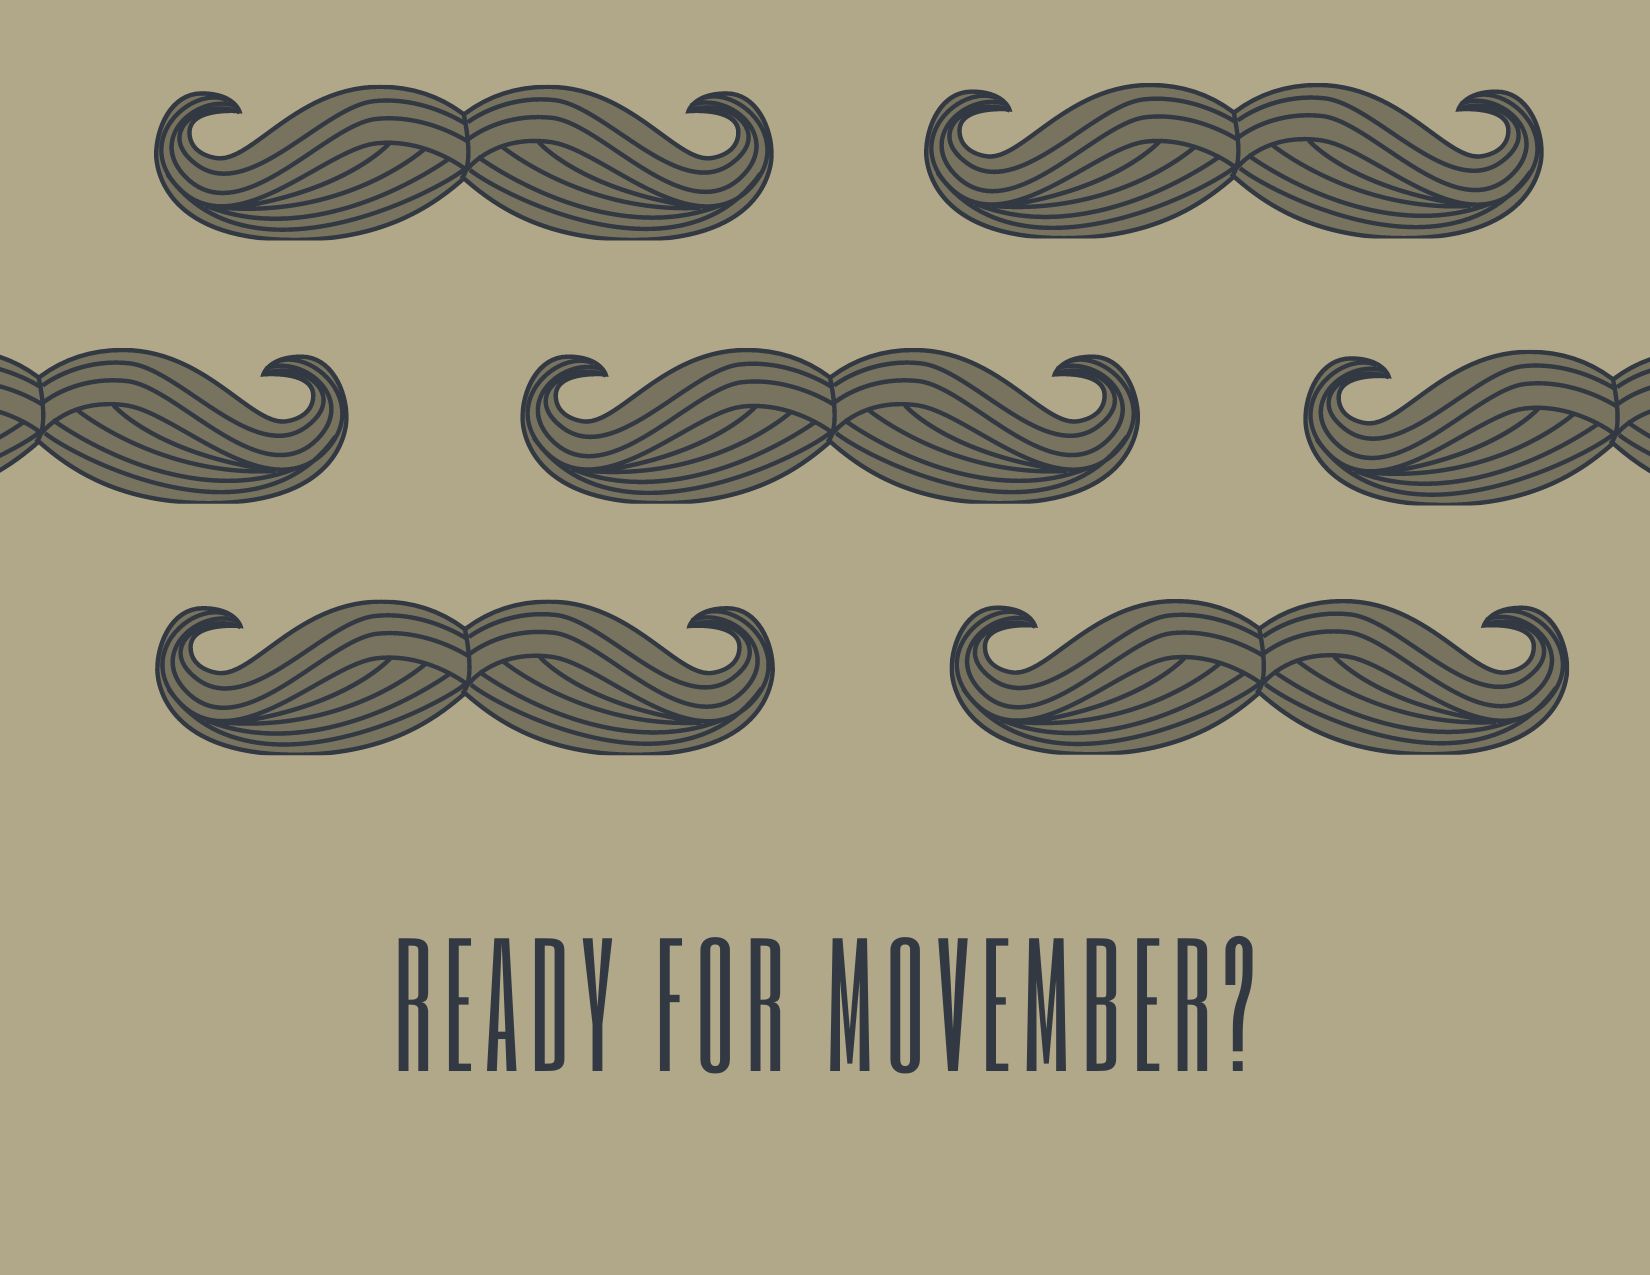 Get Ready for Movember!